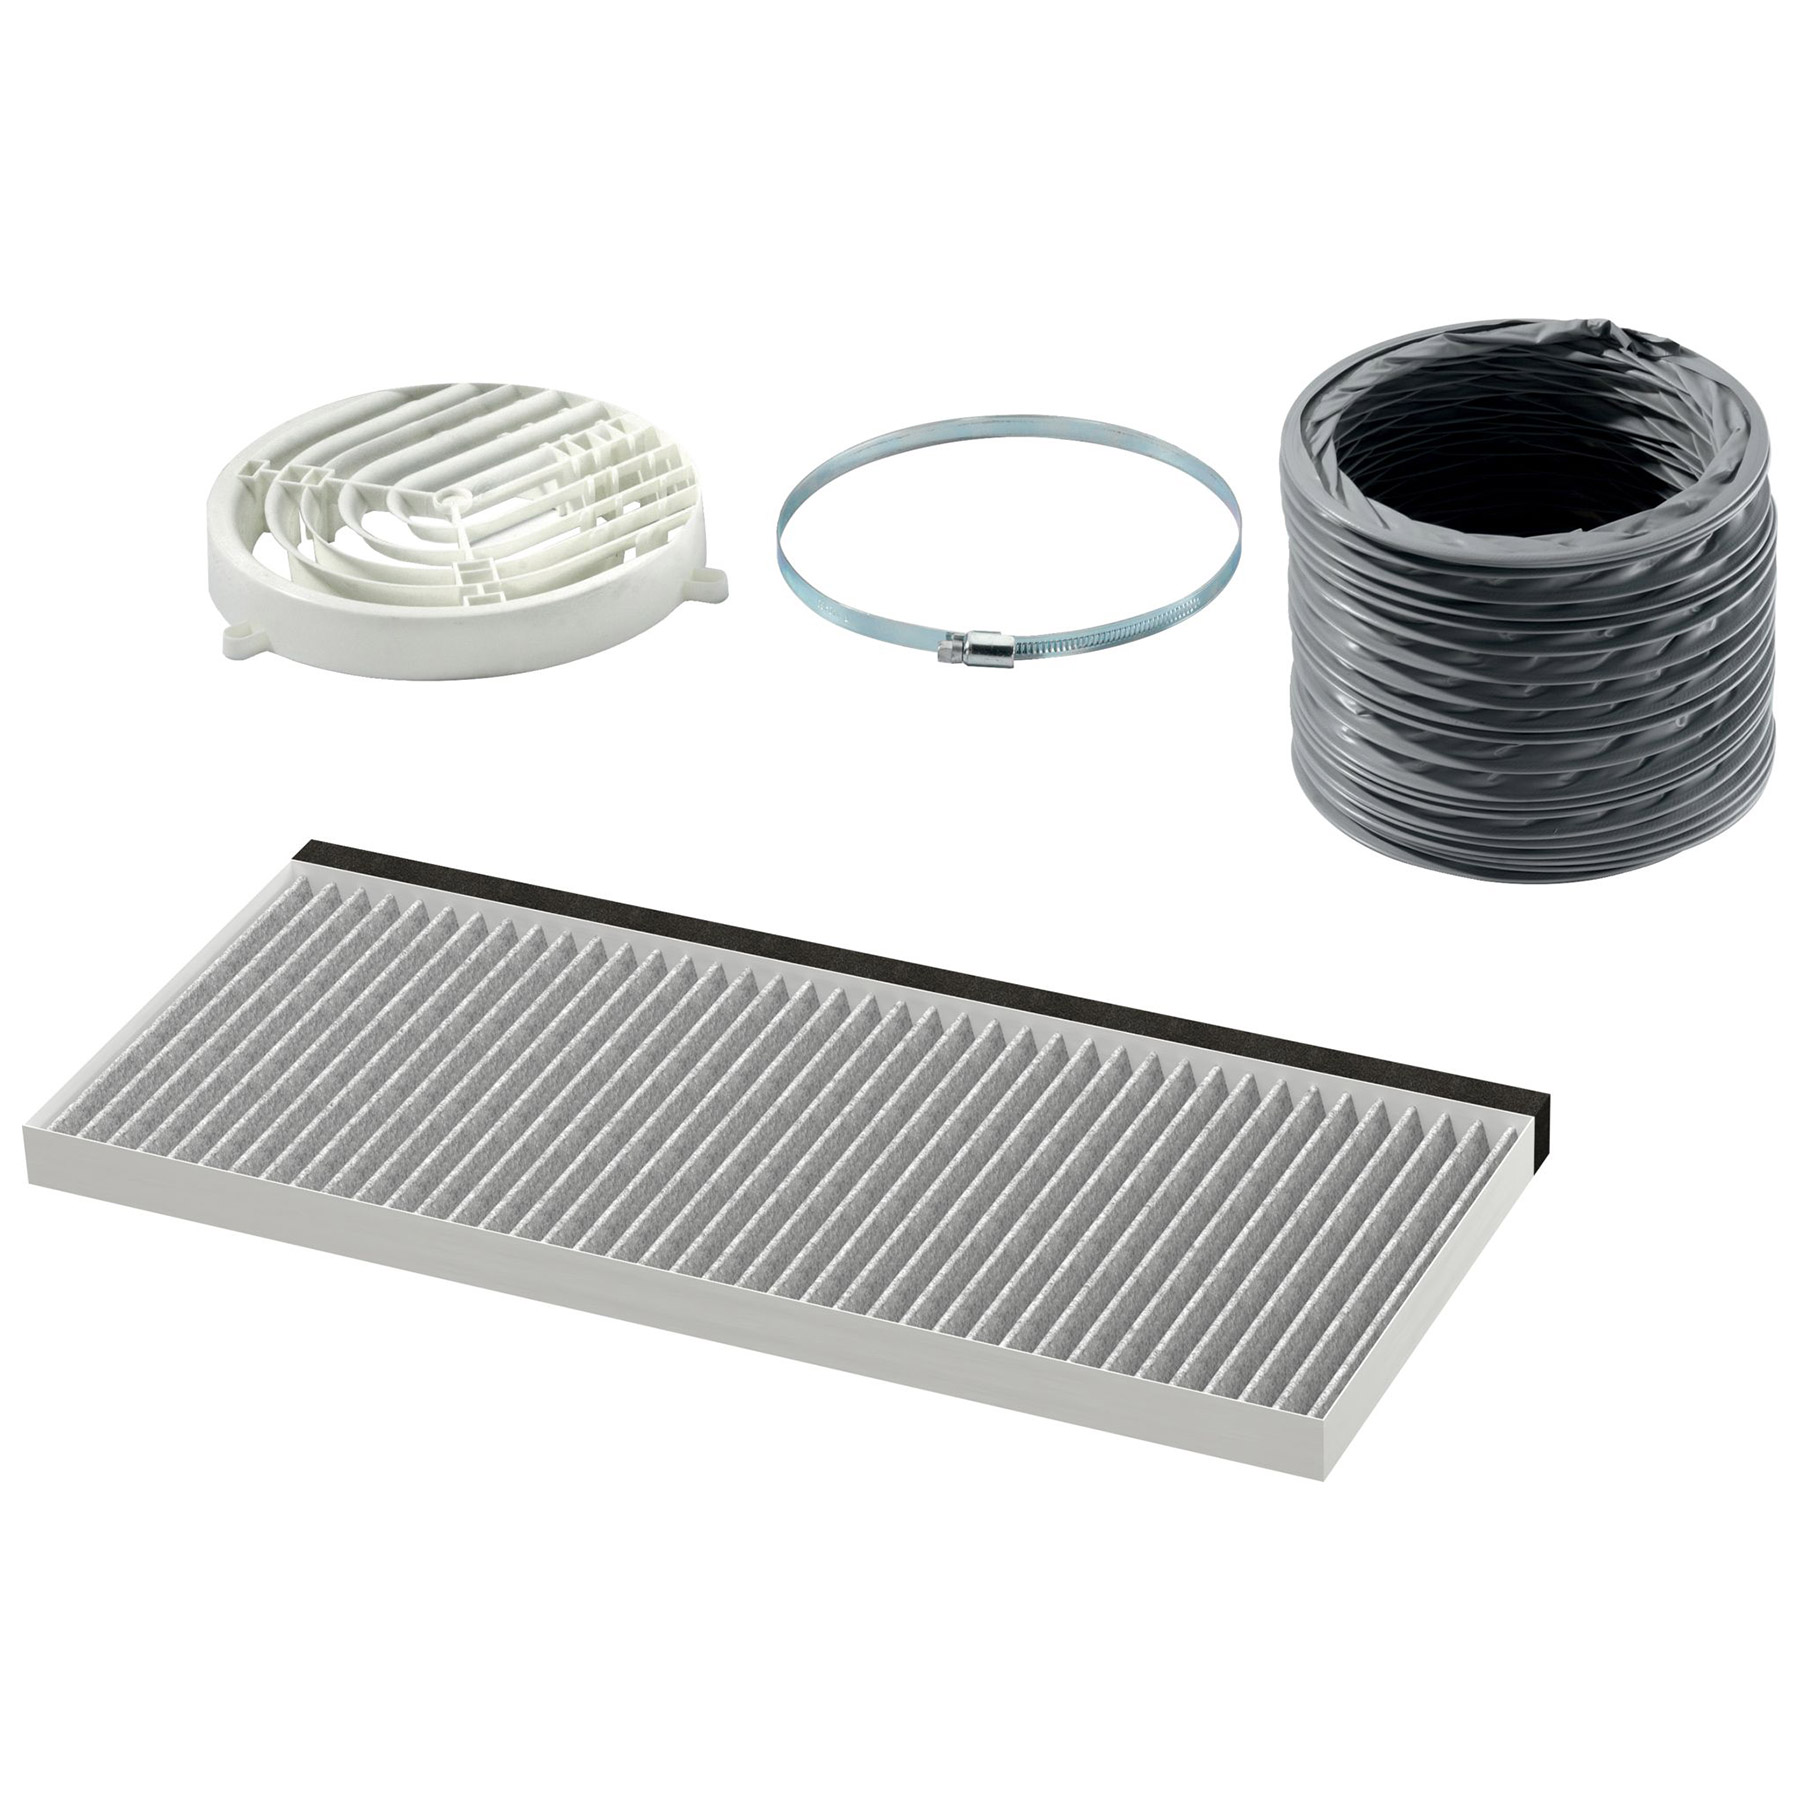 Image of Bosch DWZ6IB1I4 CleanAir Standard Recirculation Kit for All